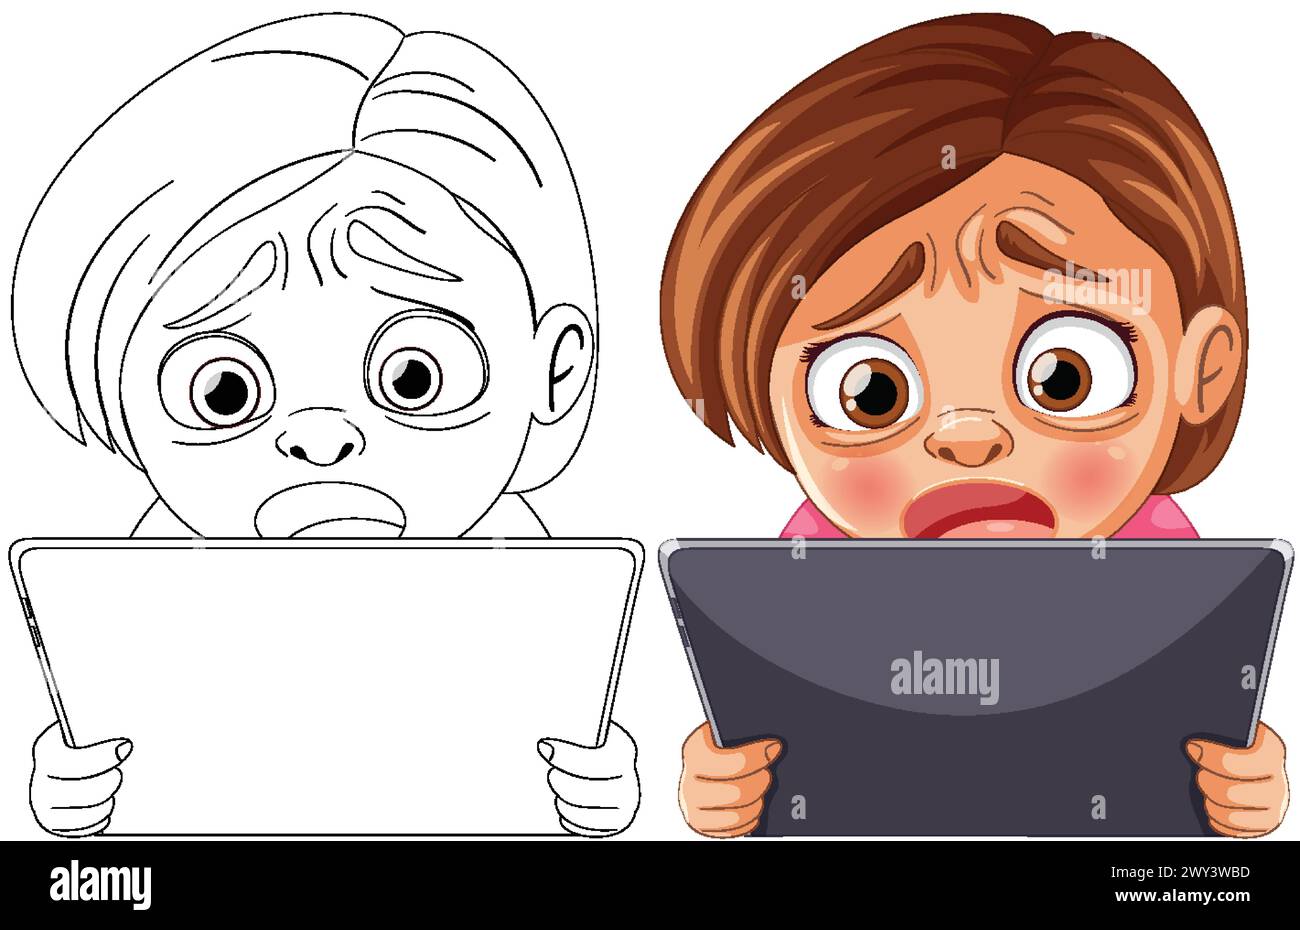 Two cartoon children looking shocked at their screens. Stock Vector